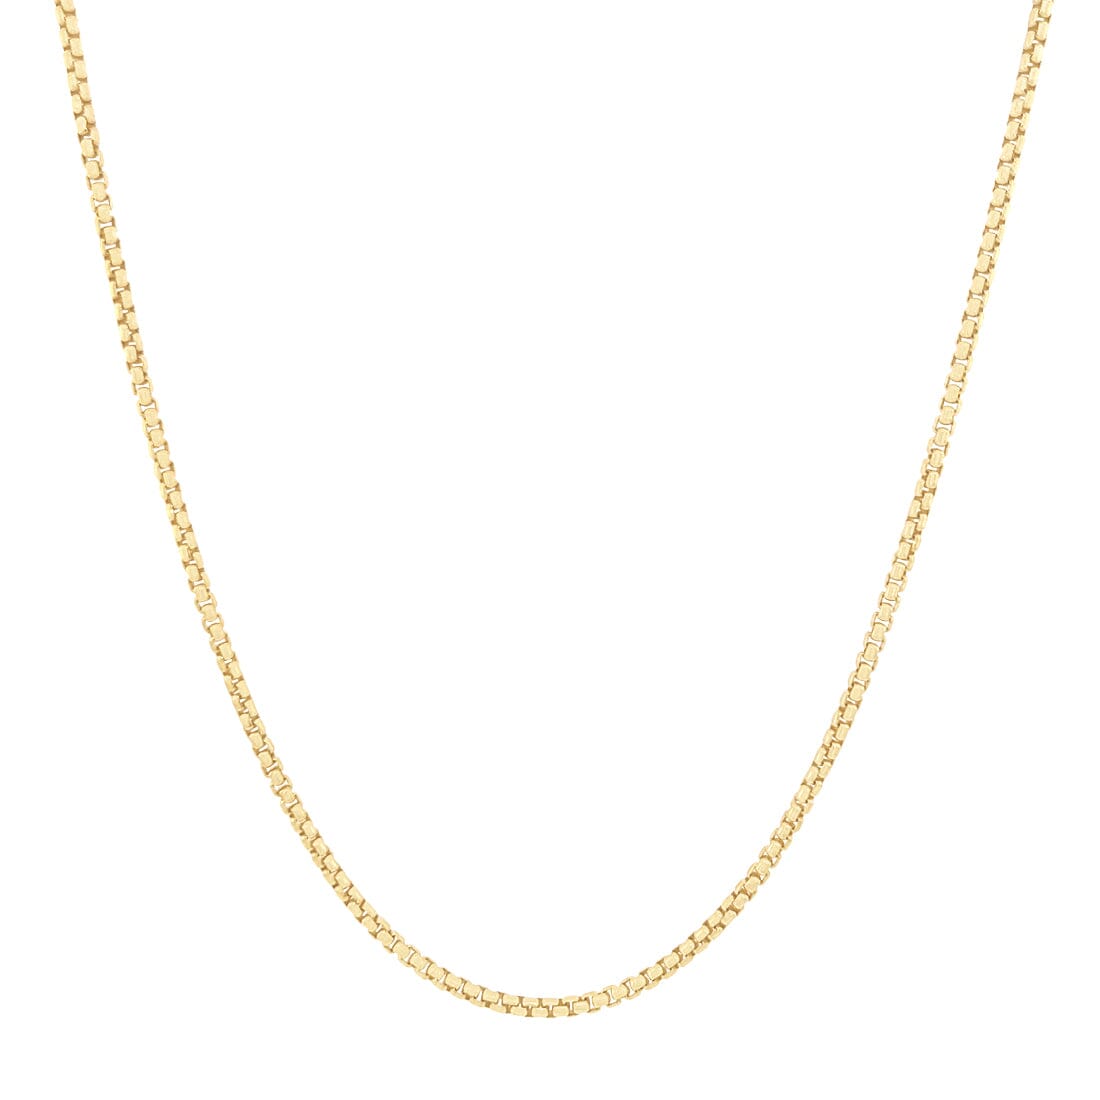 Round Box Chain Necklace in 9ct Yellow Gold Silver Infused 50cm Necklaces Bevilles 